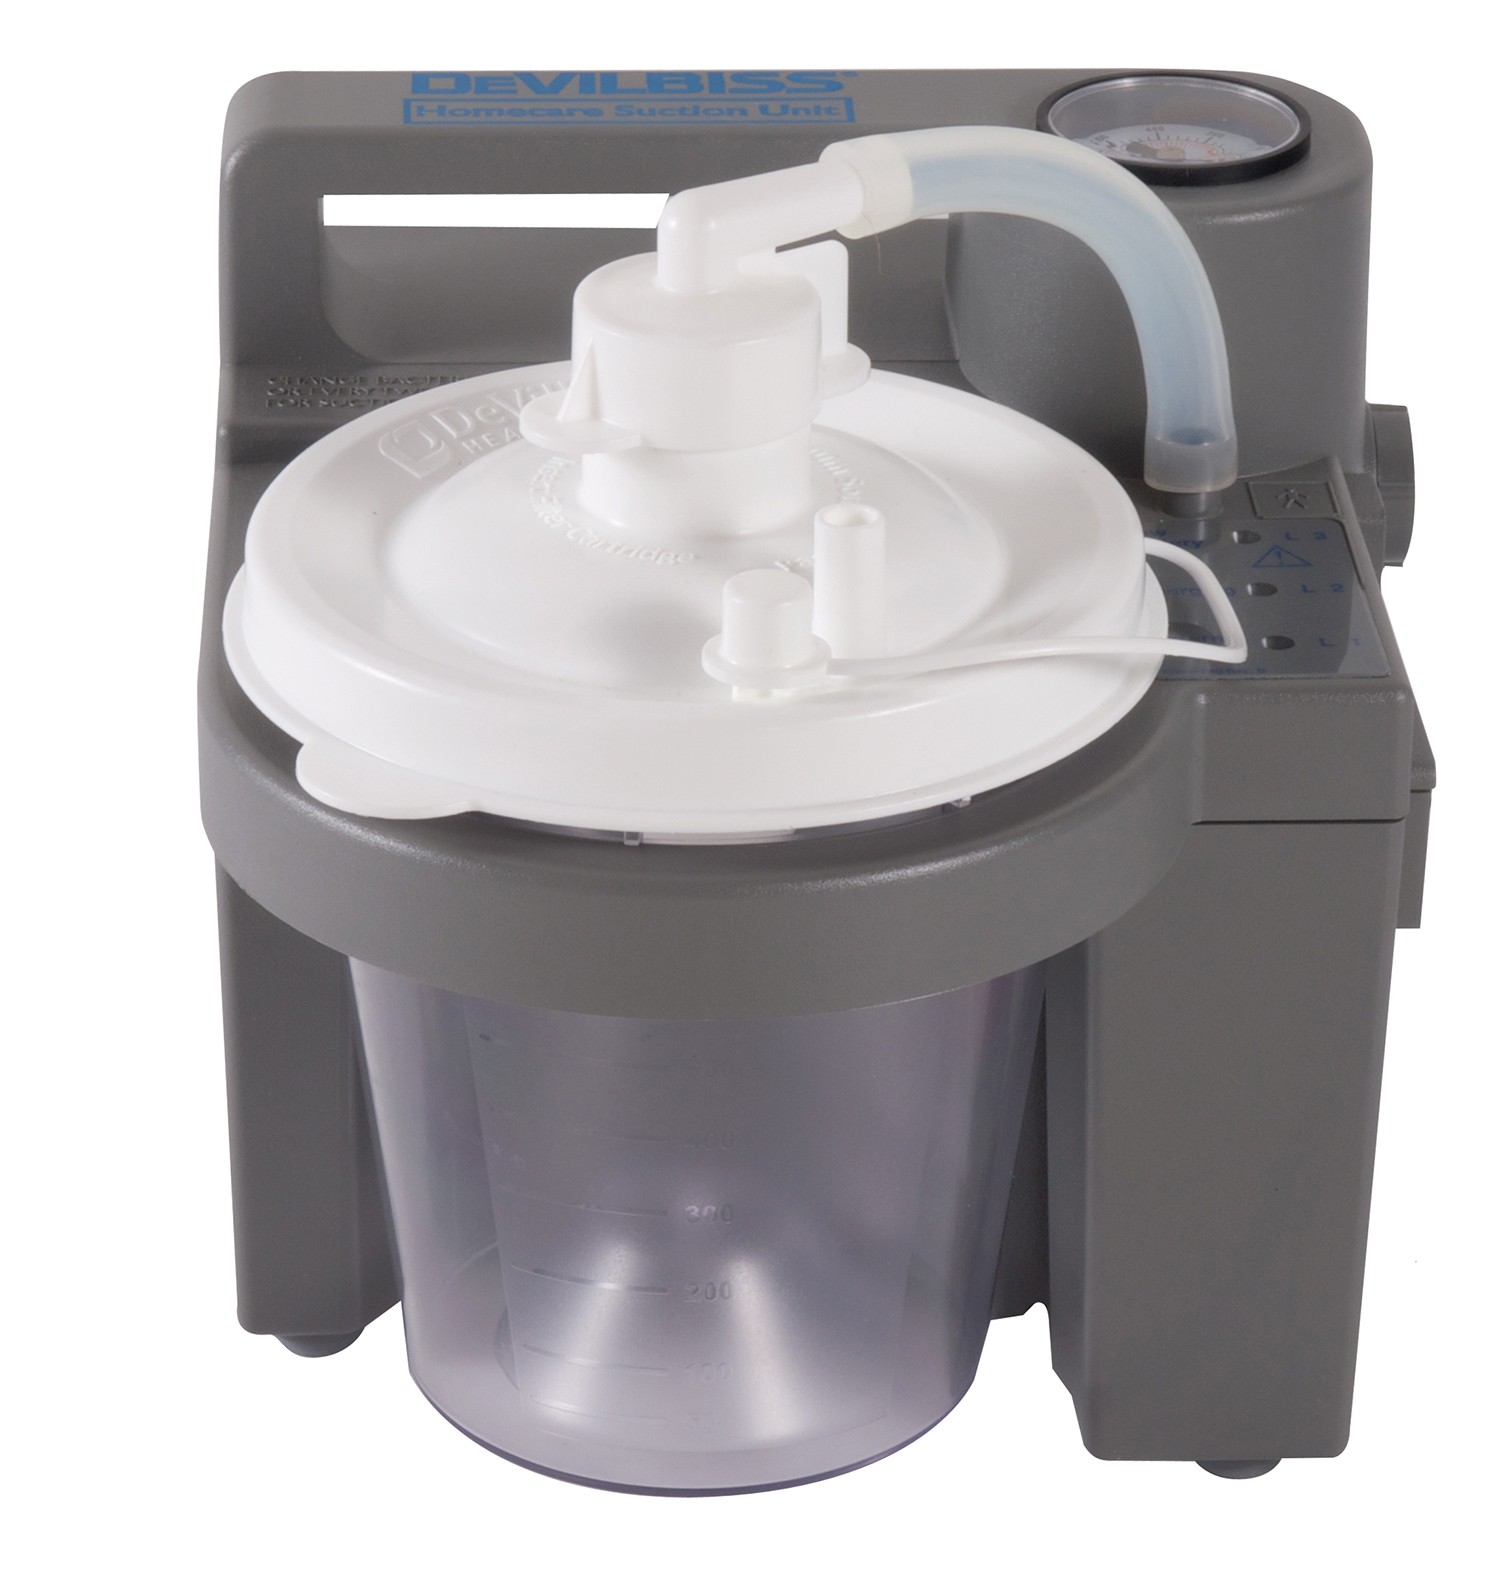 Suction Aspirators Products, Supplies and Equipment